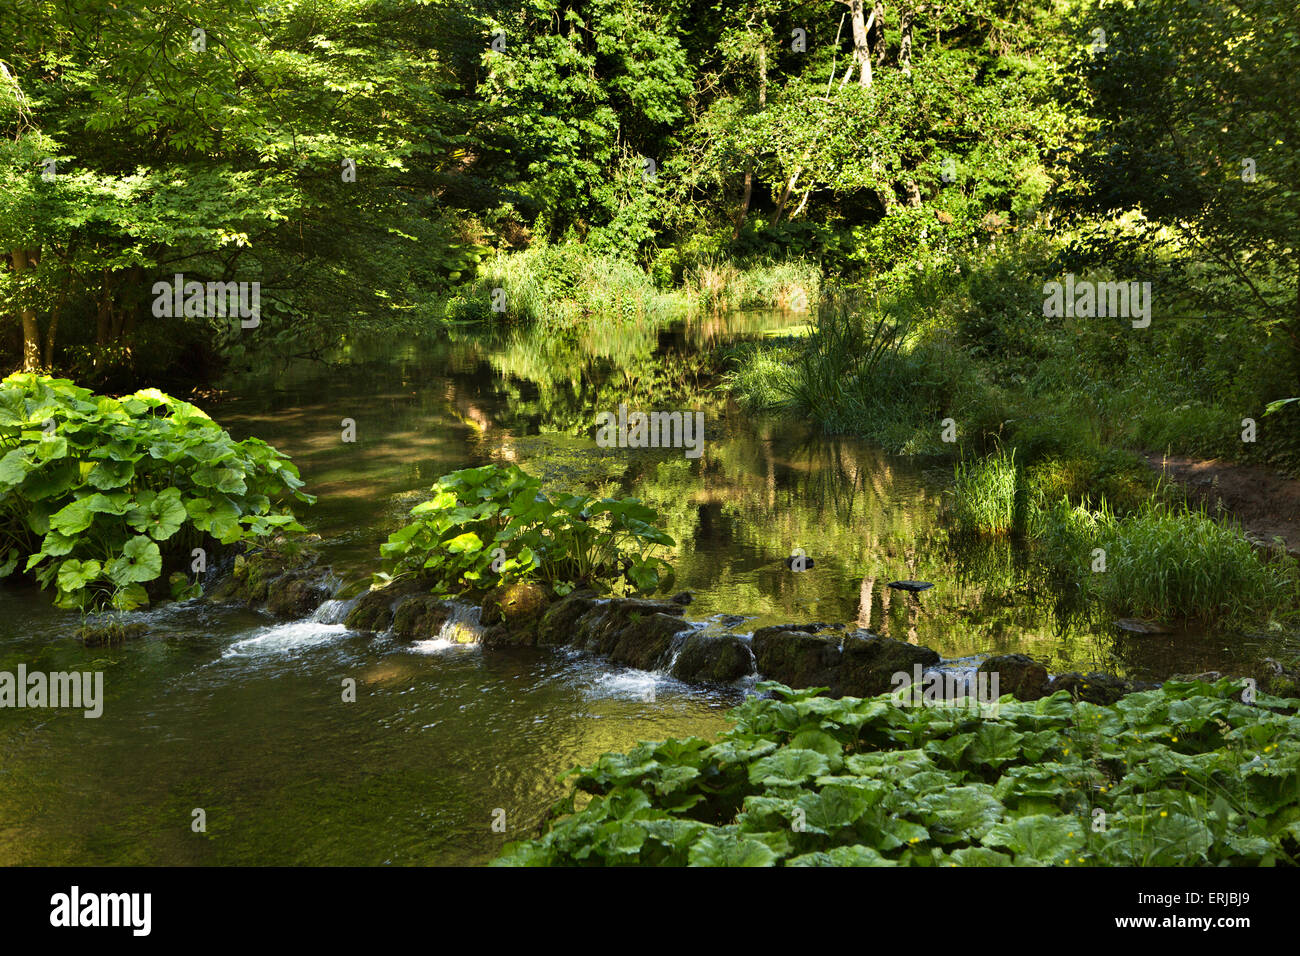 UK, England, Derbyshire, Dovedale, River Dove flowing over weir Stock Photo